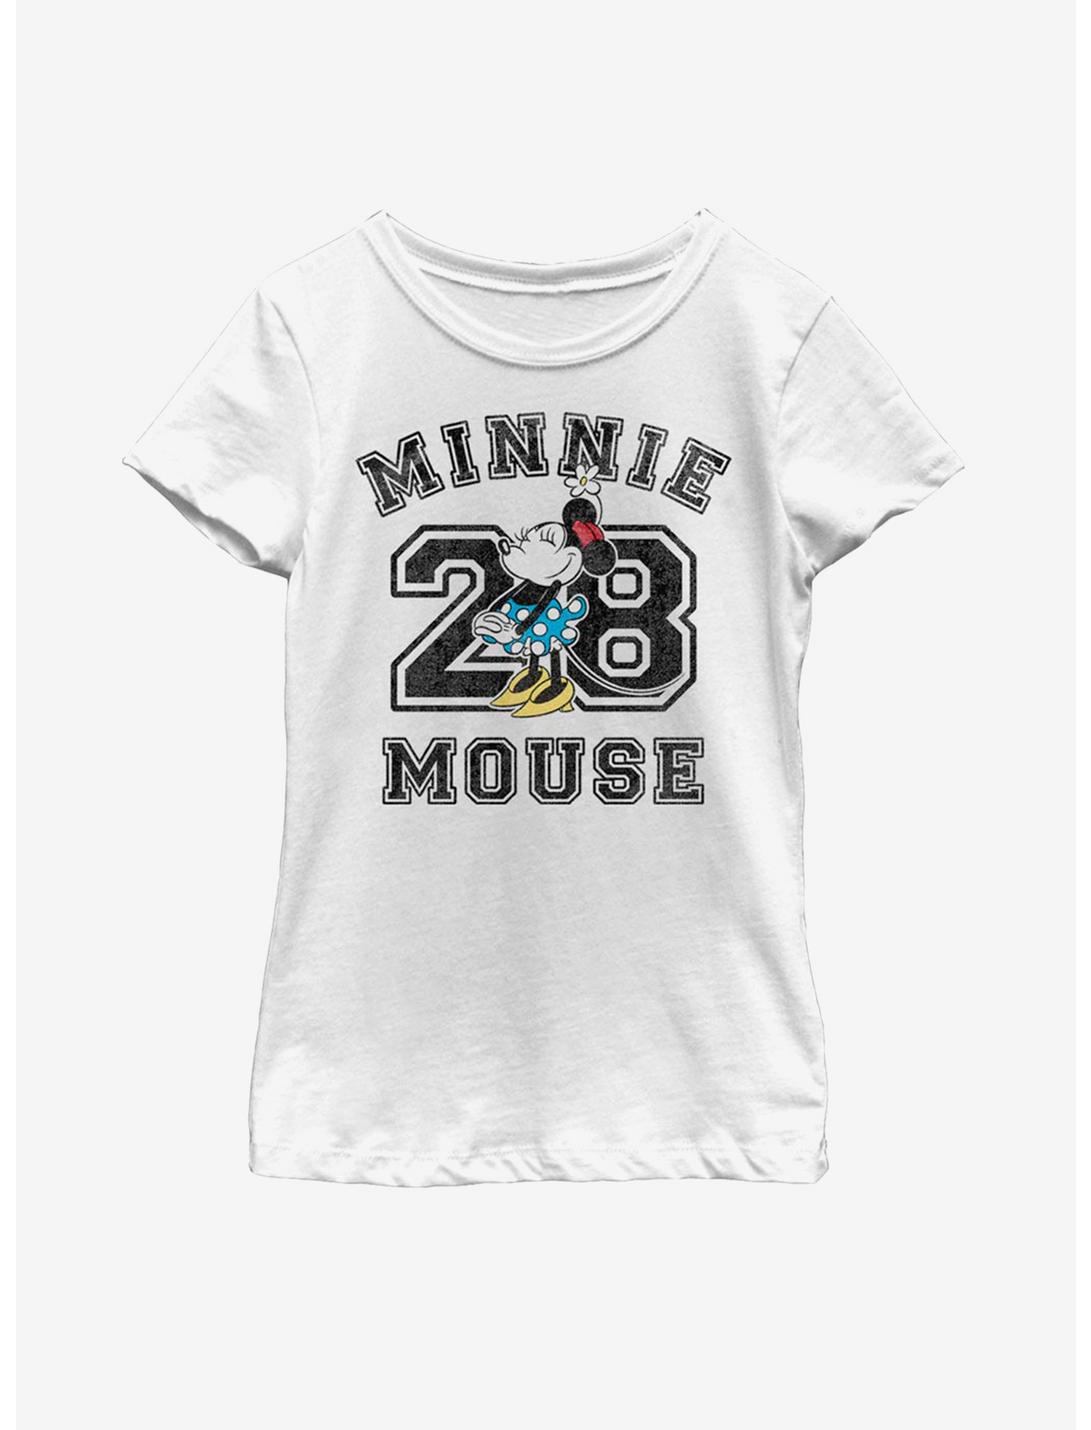 Disney Minnie Mouse Collegiate Youth Girls T-Shirt, WHITE, hi-res